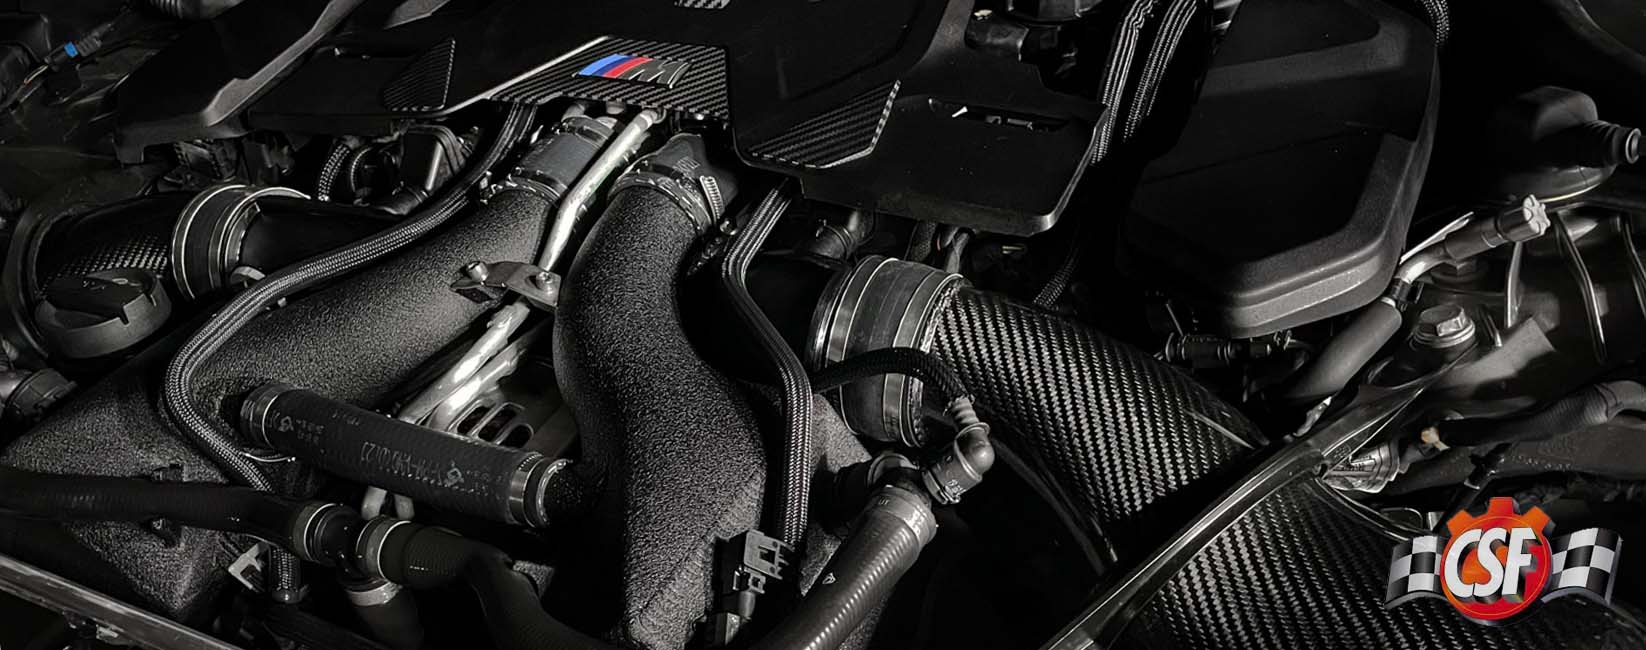 CSF Blog - BMW - BMW F90 M5 and F92 M8 Charge Coolers